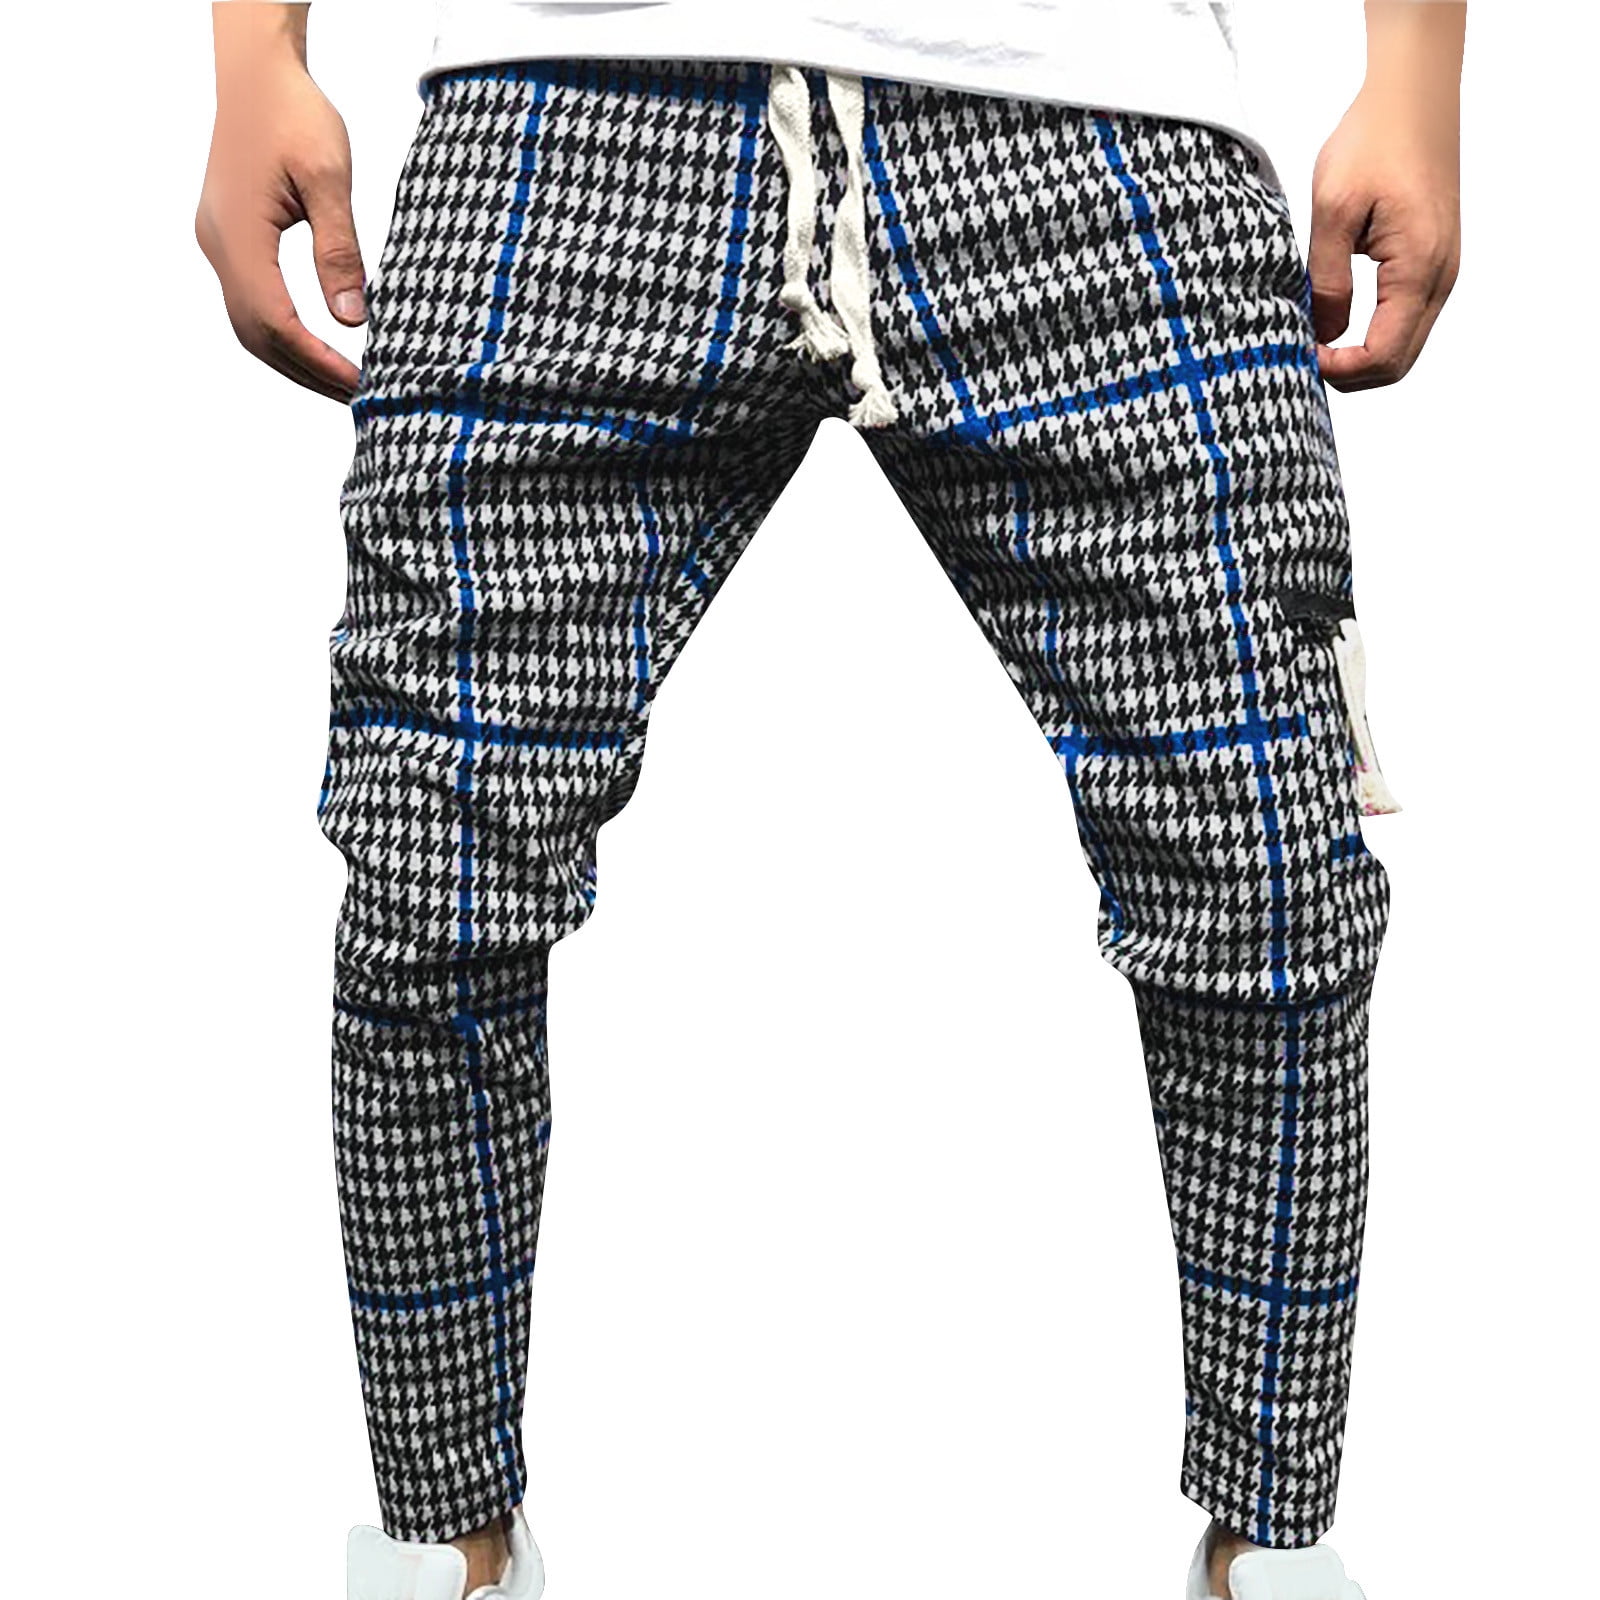 Fashion (Black White 04)Korean Trendy Plaid Pants Men's 2021 New  Comfortable Pant Summer Loose Comfortable Casual All-match Hip Hop Striped  Trousers ACU @ Best Price Online | Jumia Egypt